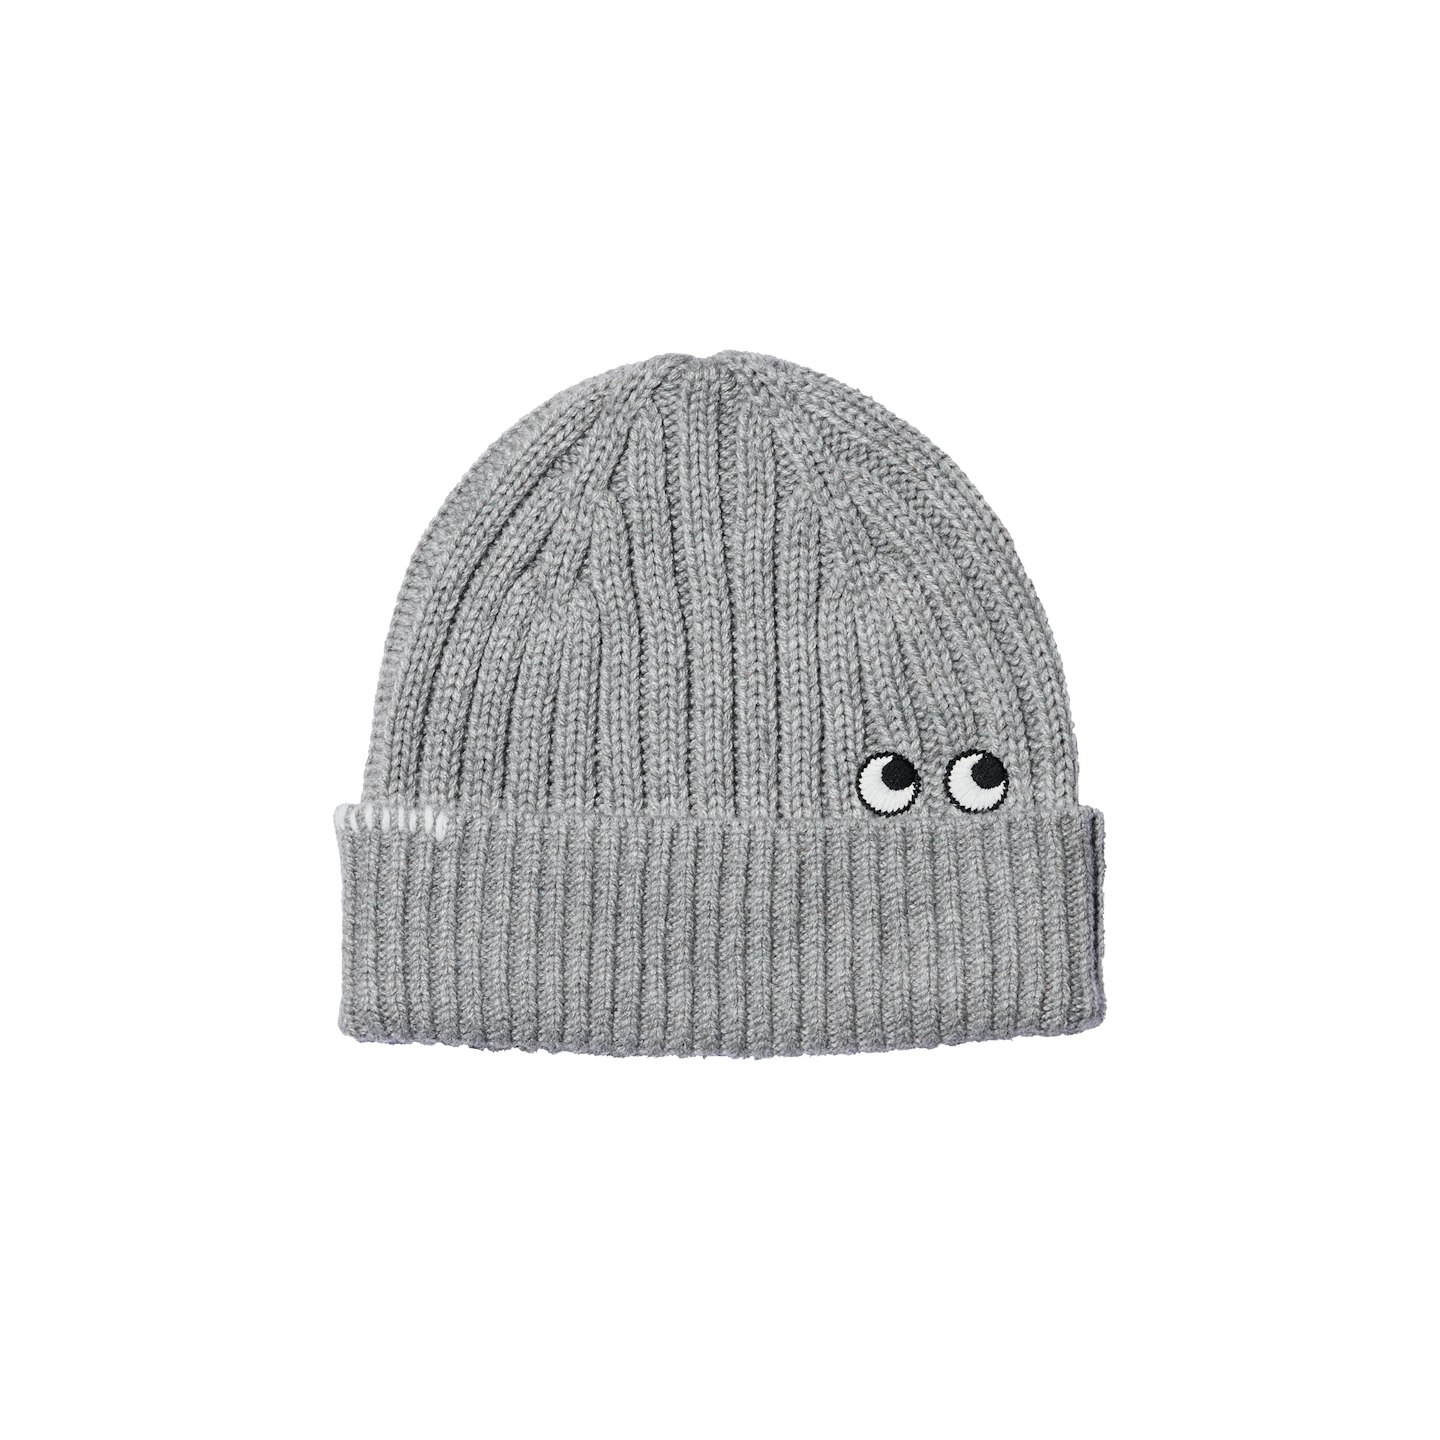 Uniqlo x Anya Hindmarch, Heattech Knitted Beanie Hat